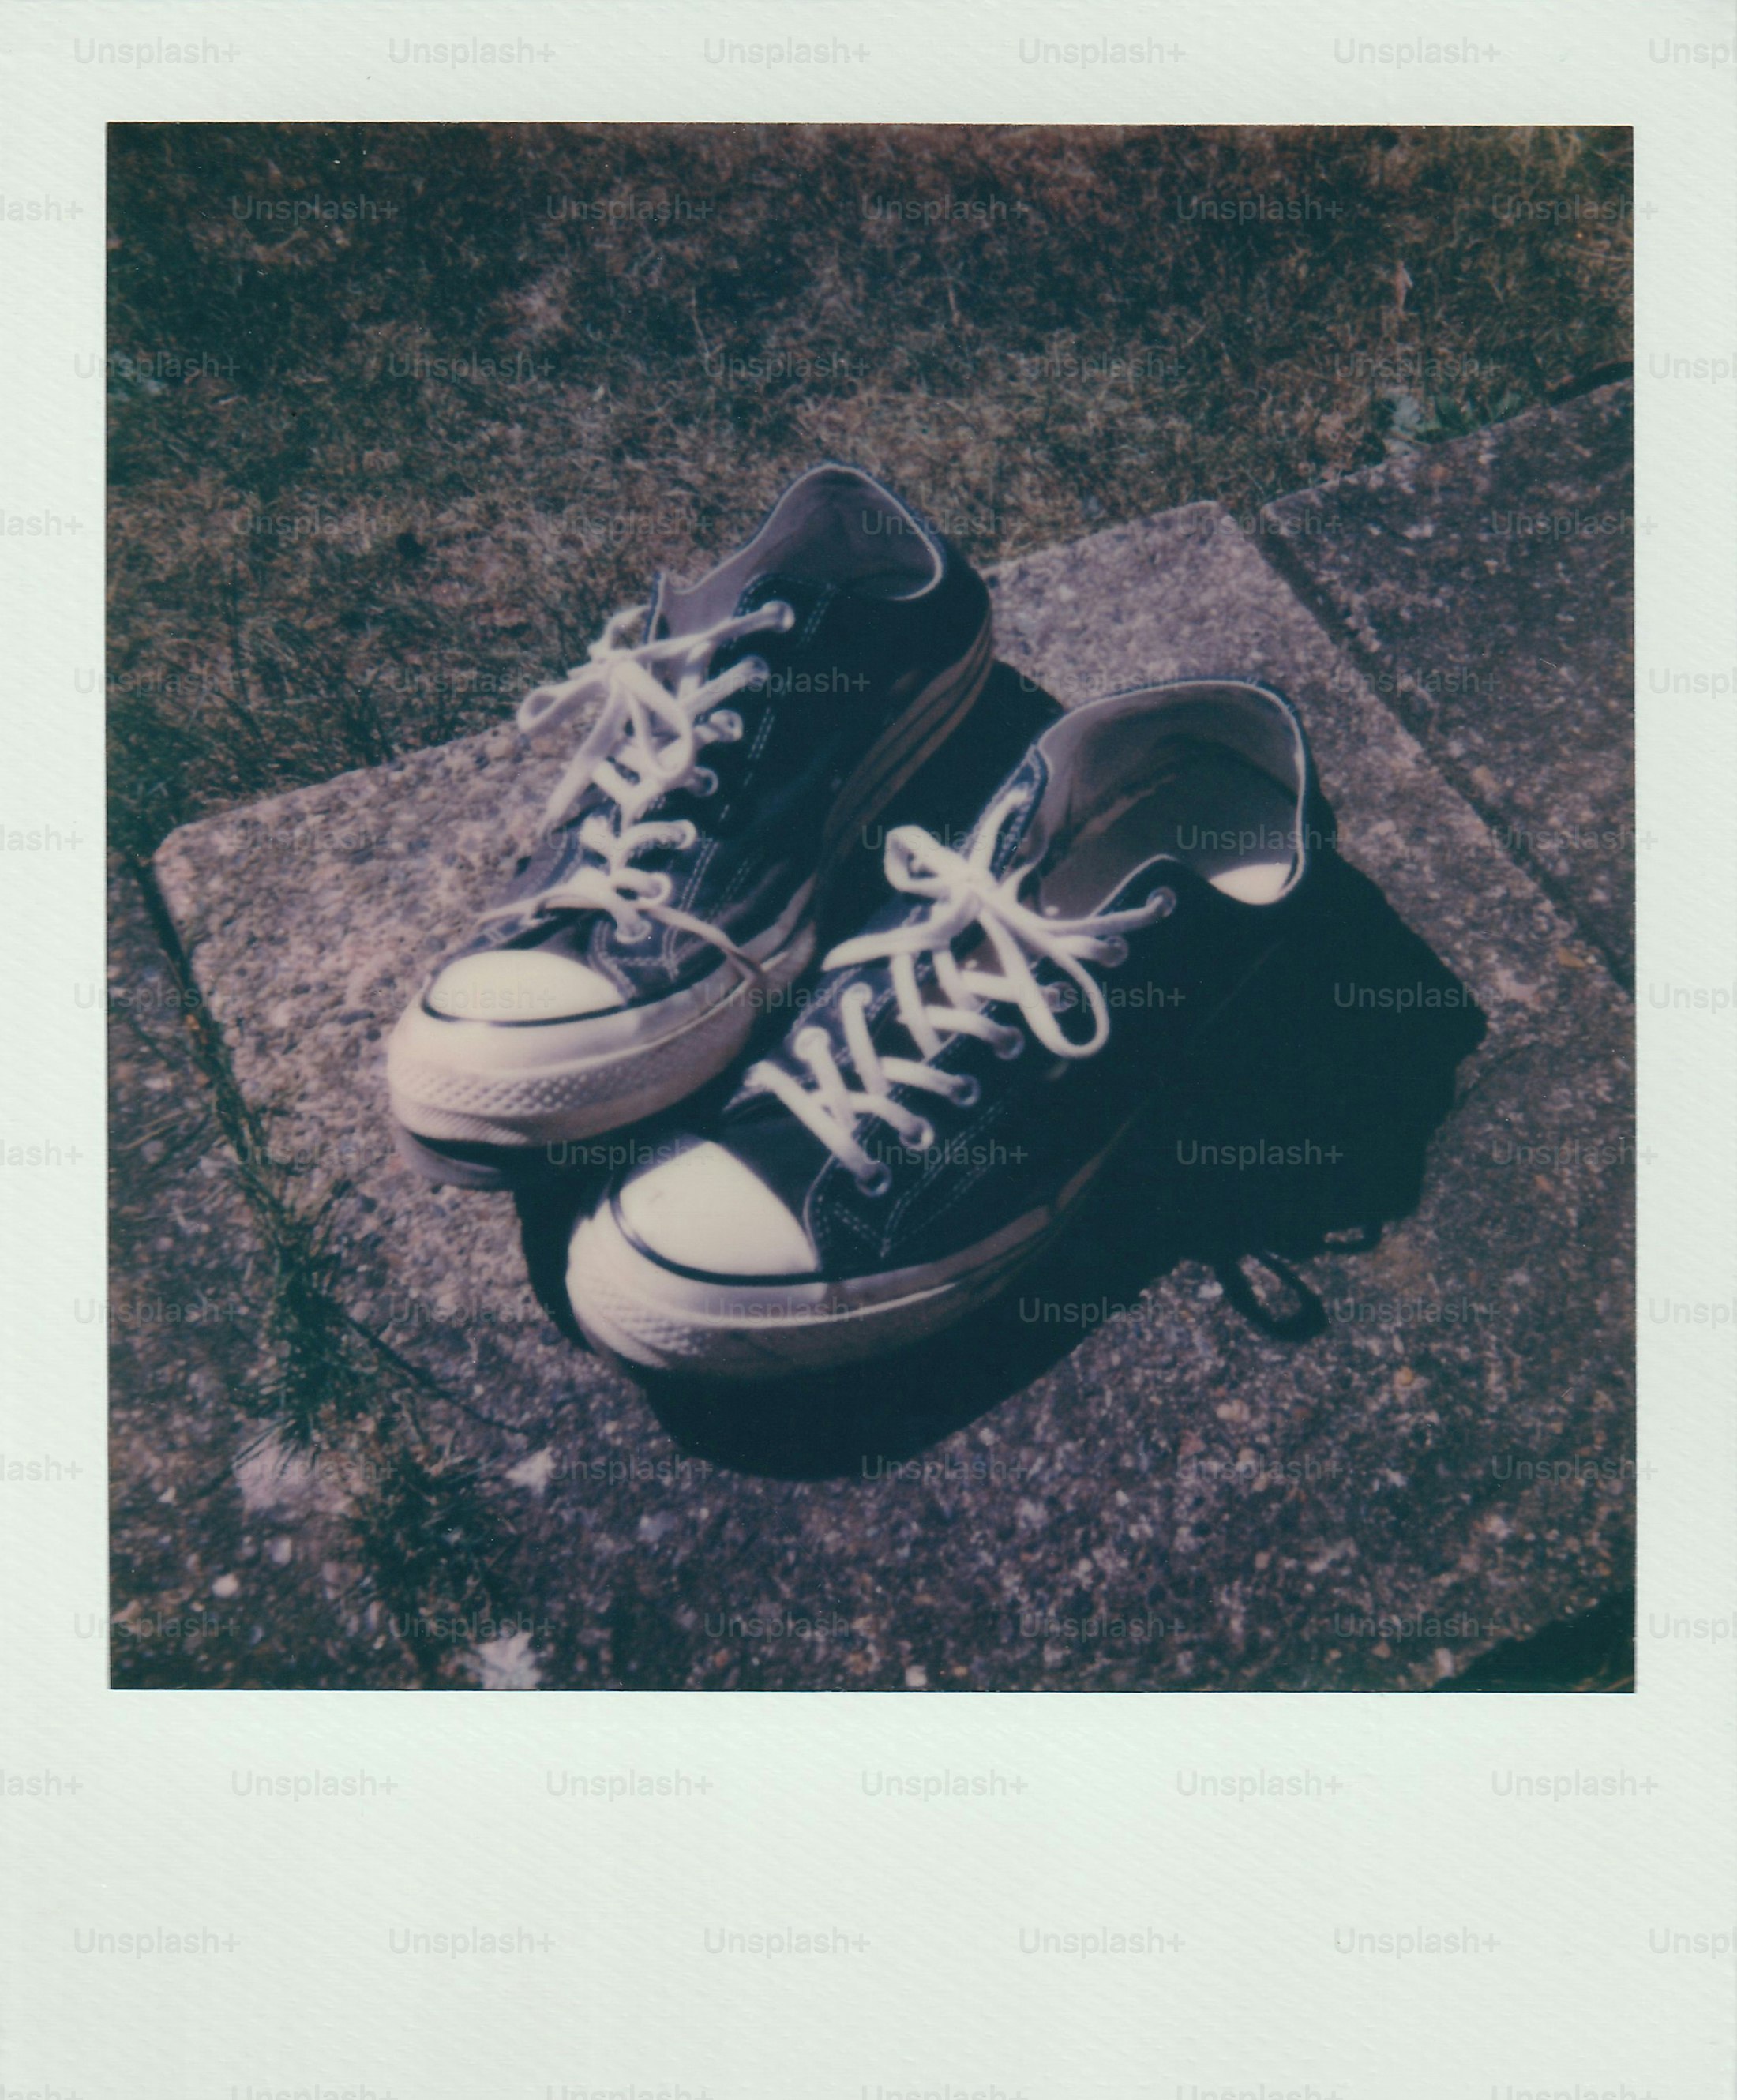 A Polaroid photograph of beaten up trainers.